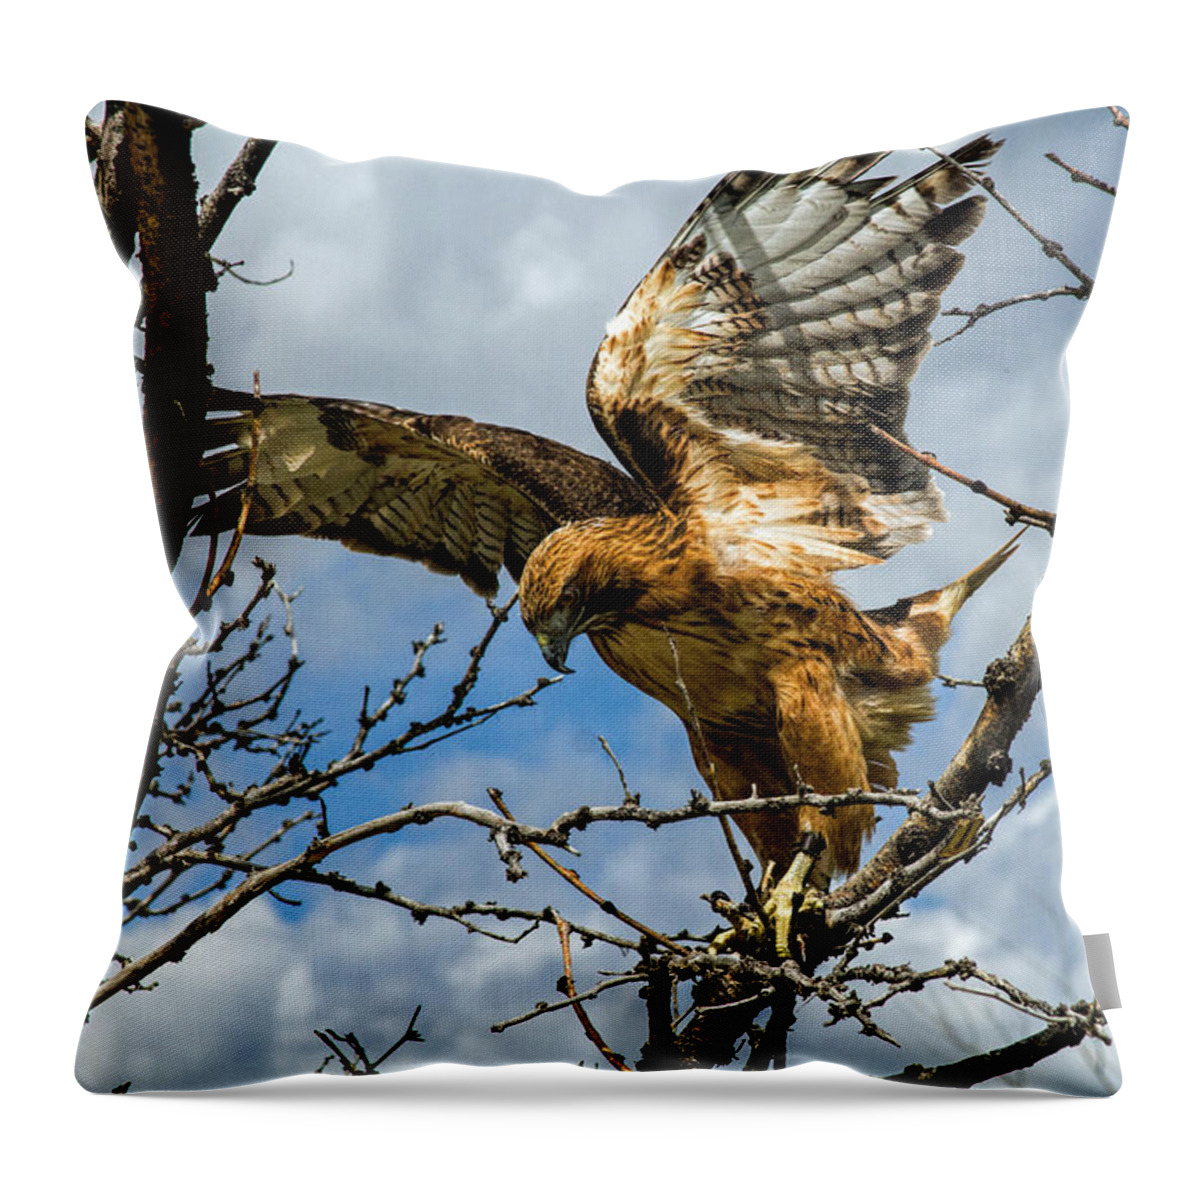 Nature Throw Pillow featuring the photograph Lady Hawke by Alana Thrower